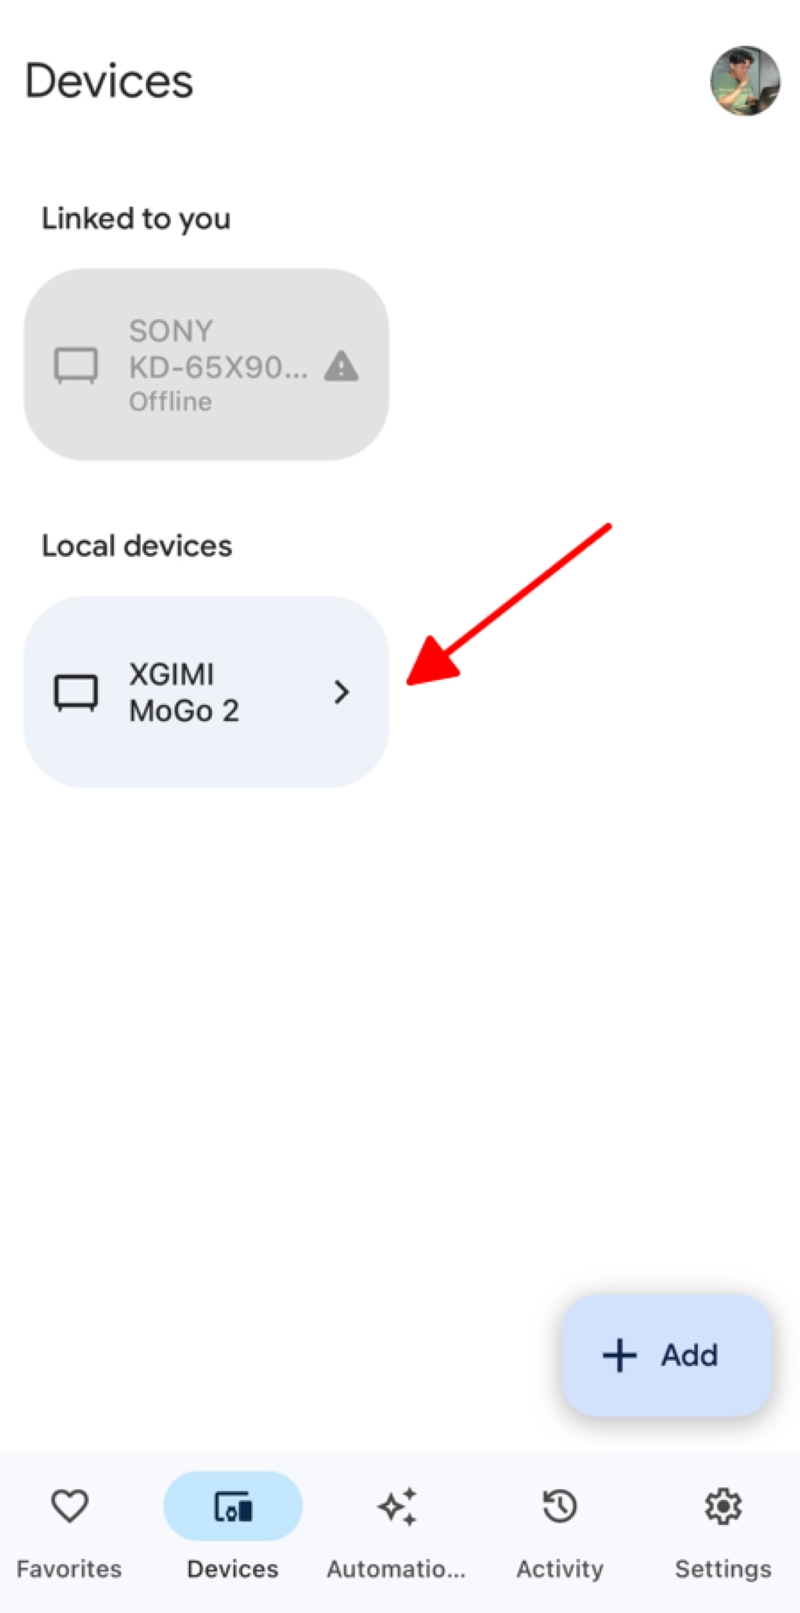 select the XGIMI Mogo 2 projector on the Google Home Devices section